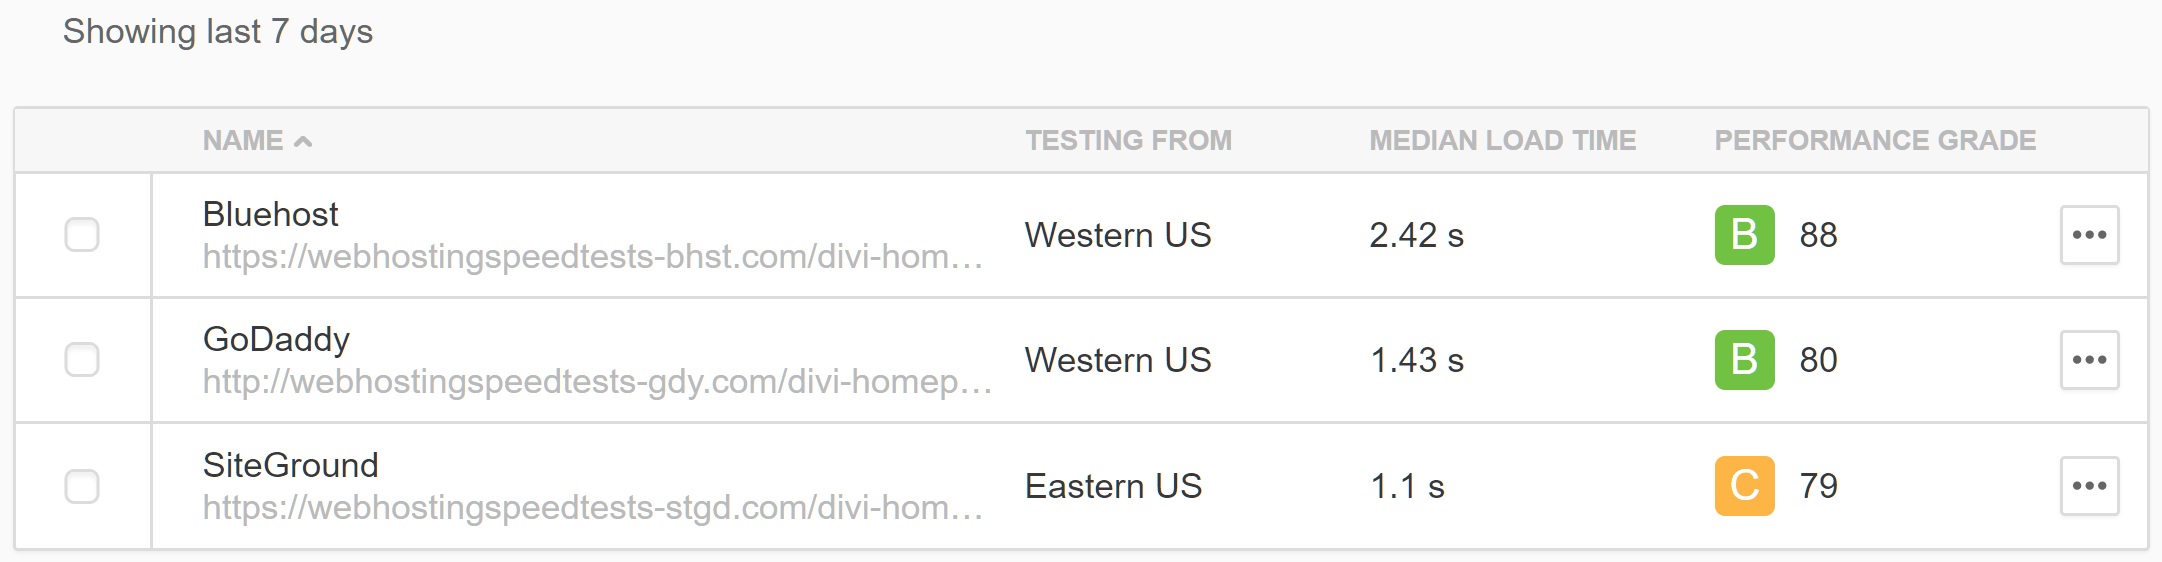 Test Results for the Divi Theme